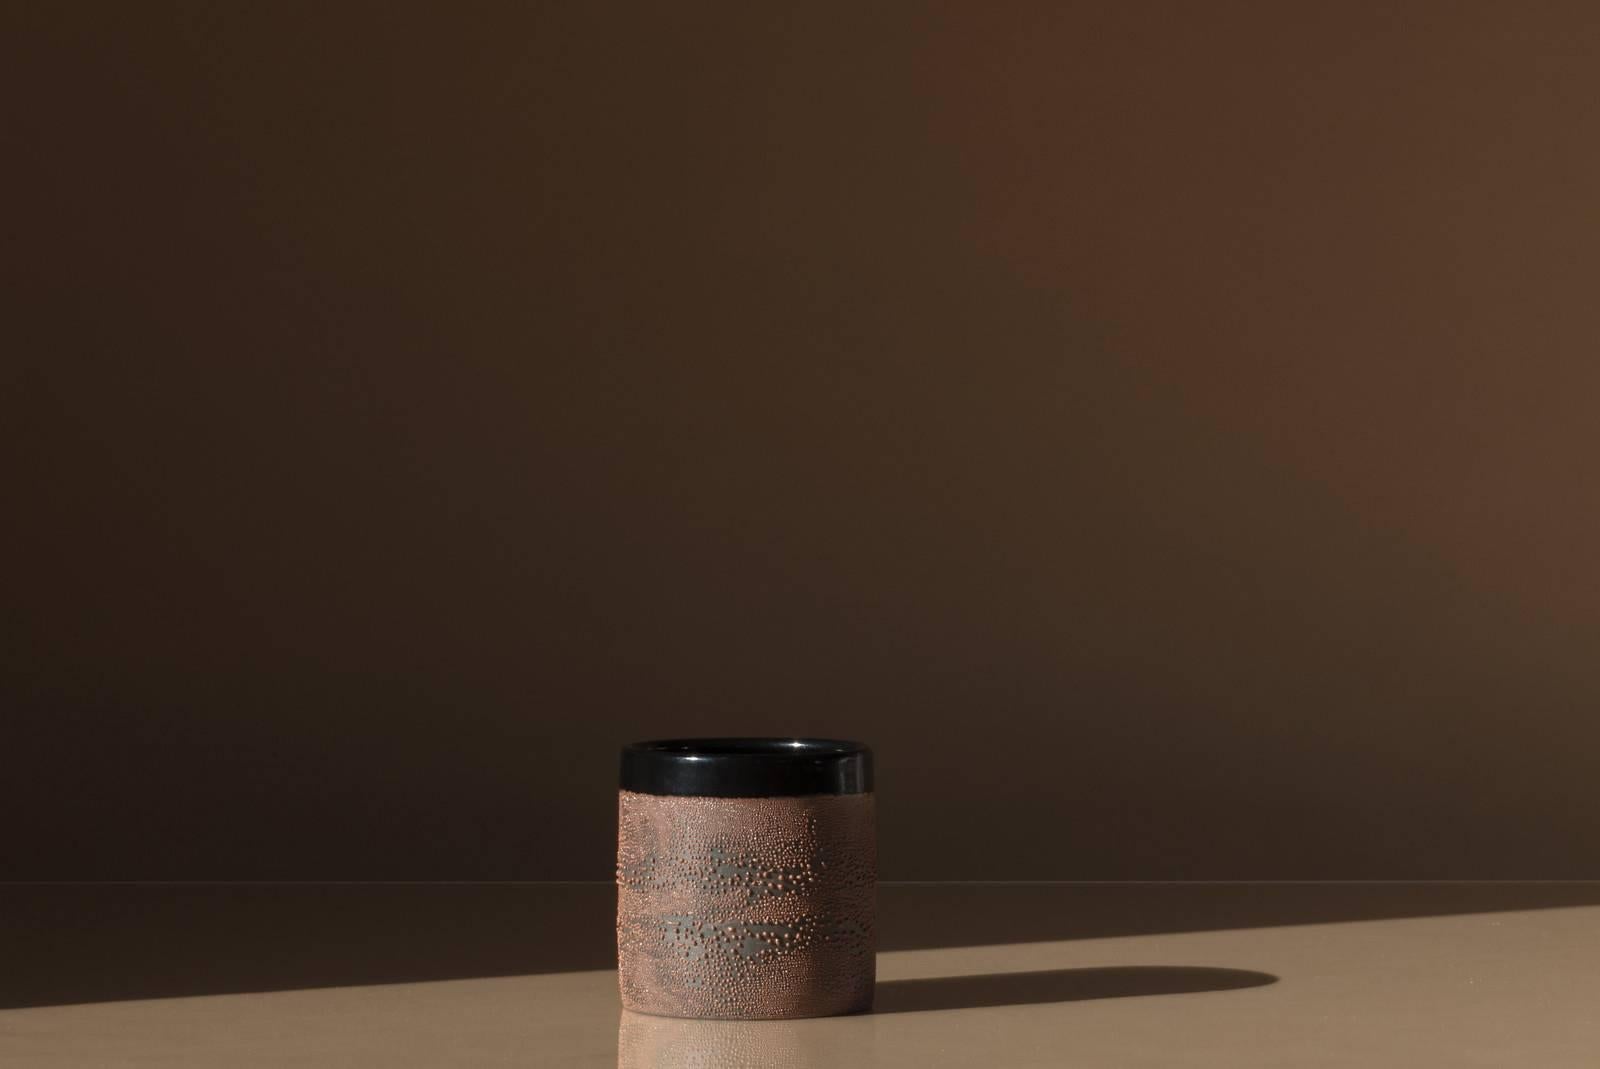 Handmade stoneware cup. Glossy black interior and rim with textured brown dew glaze body. Also available in black and white. Handmade by Malka Dina in Brooklyn, NY.
Due to the handmade nature of this item, each piece will be slightly unique and